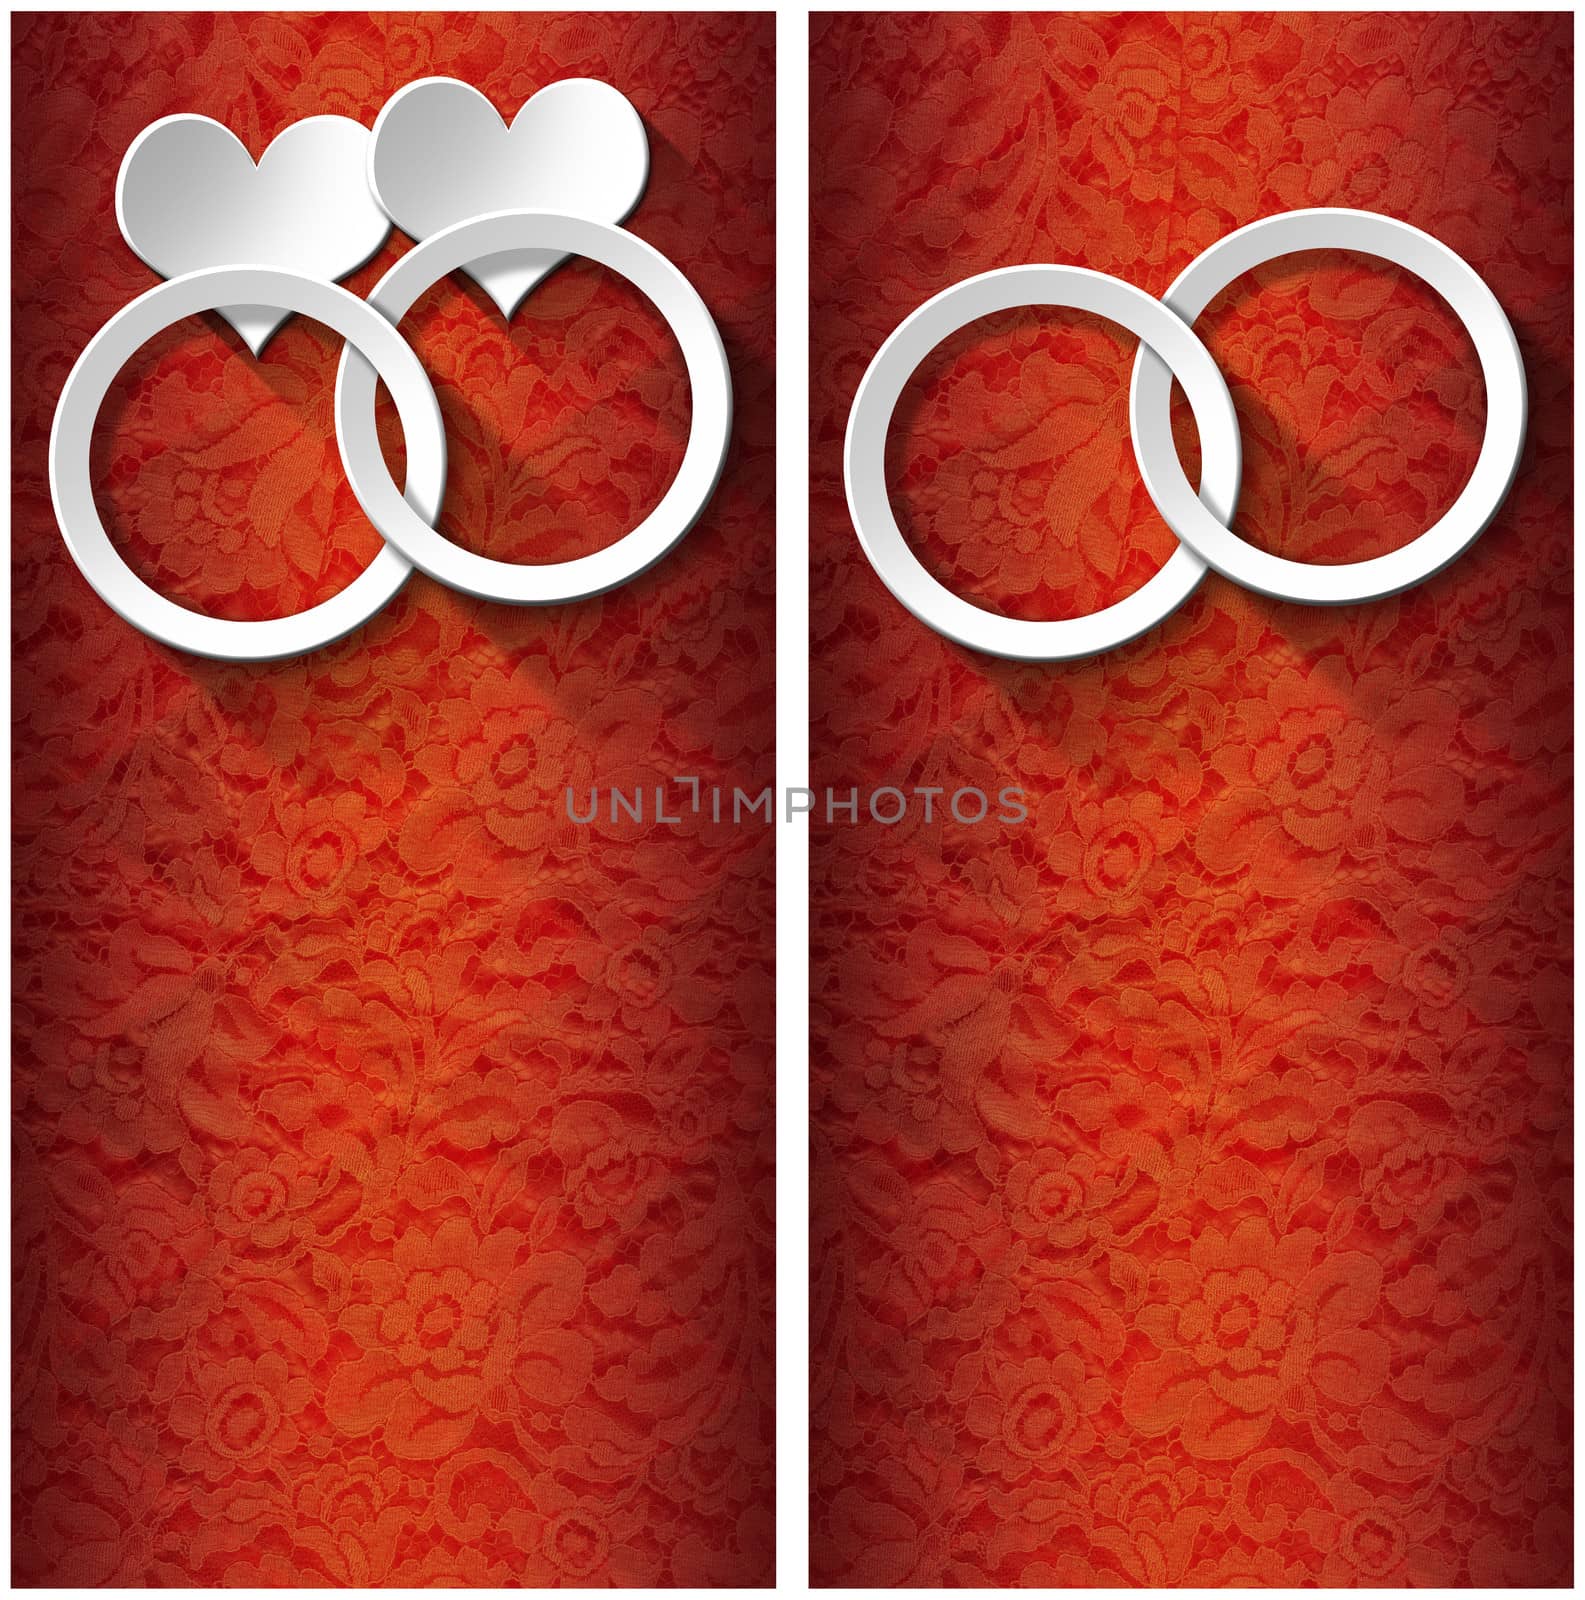 Two stylized white hearts and two wedding rings on orange floral background with shadows - Backgrounds for wedding invitation